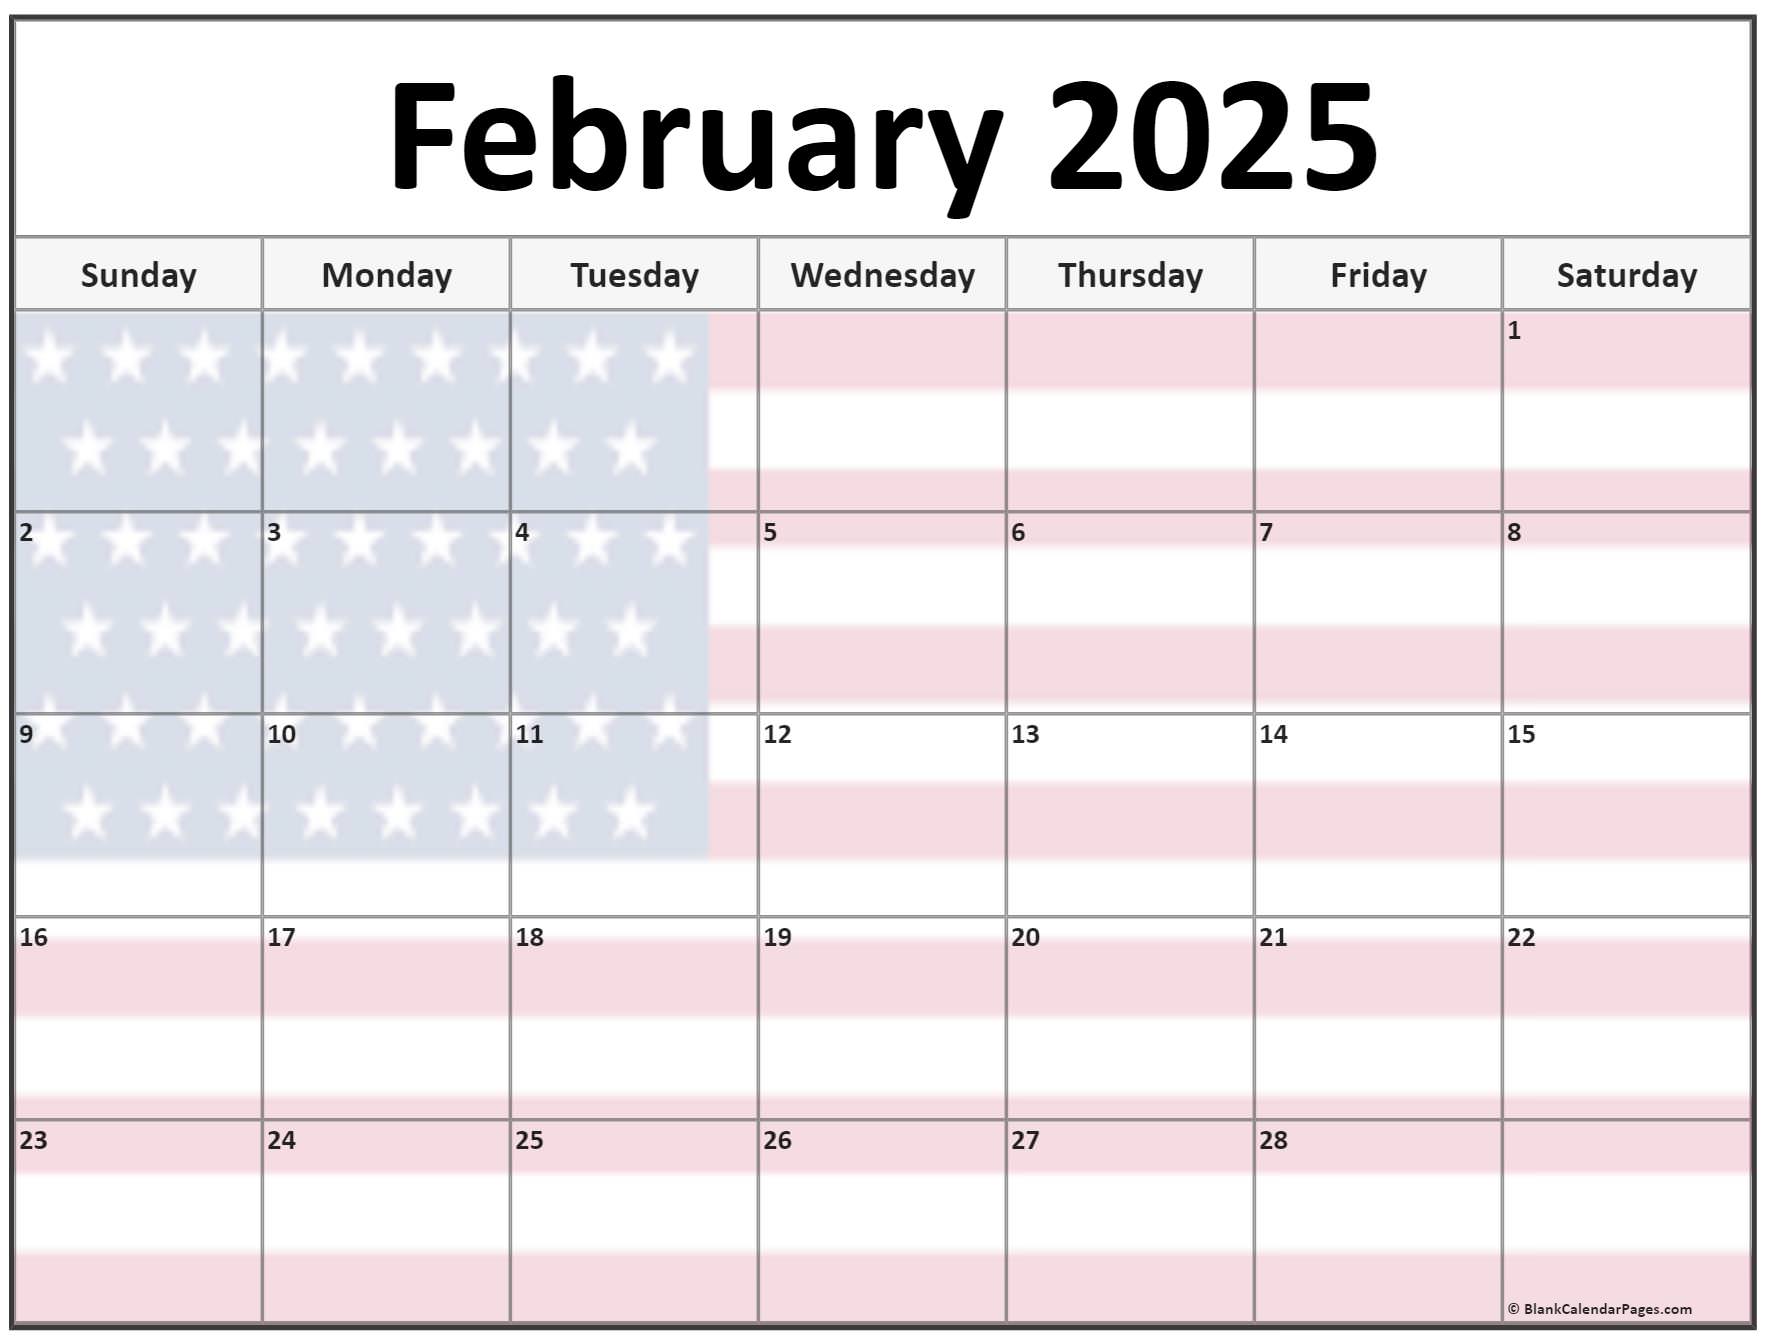 Collection of February 2025 photo calendars with image filters